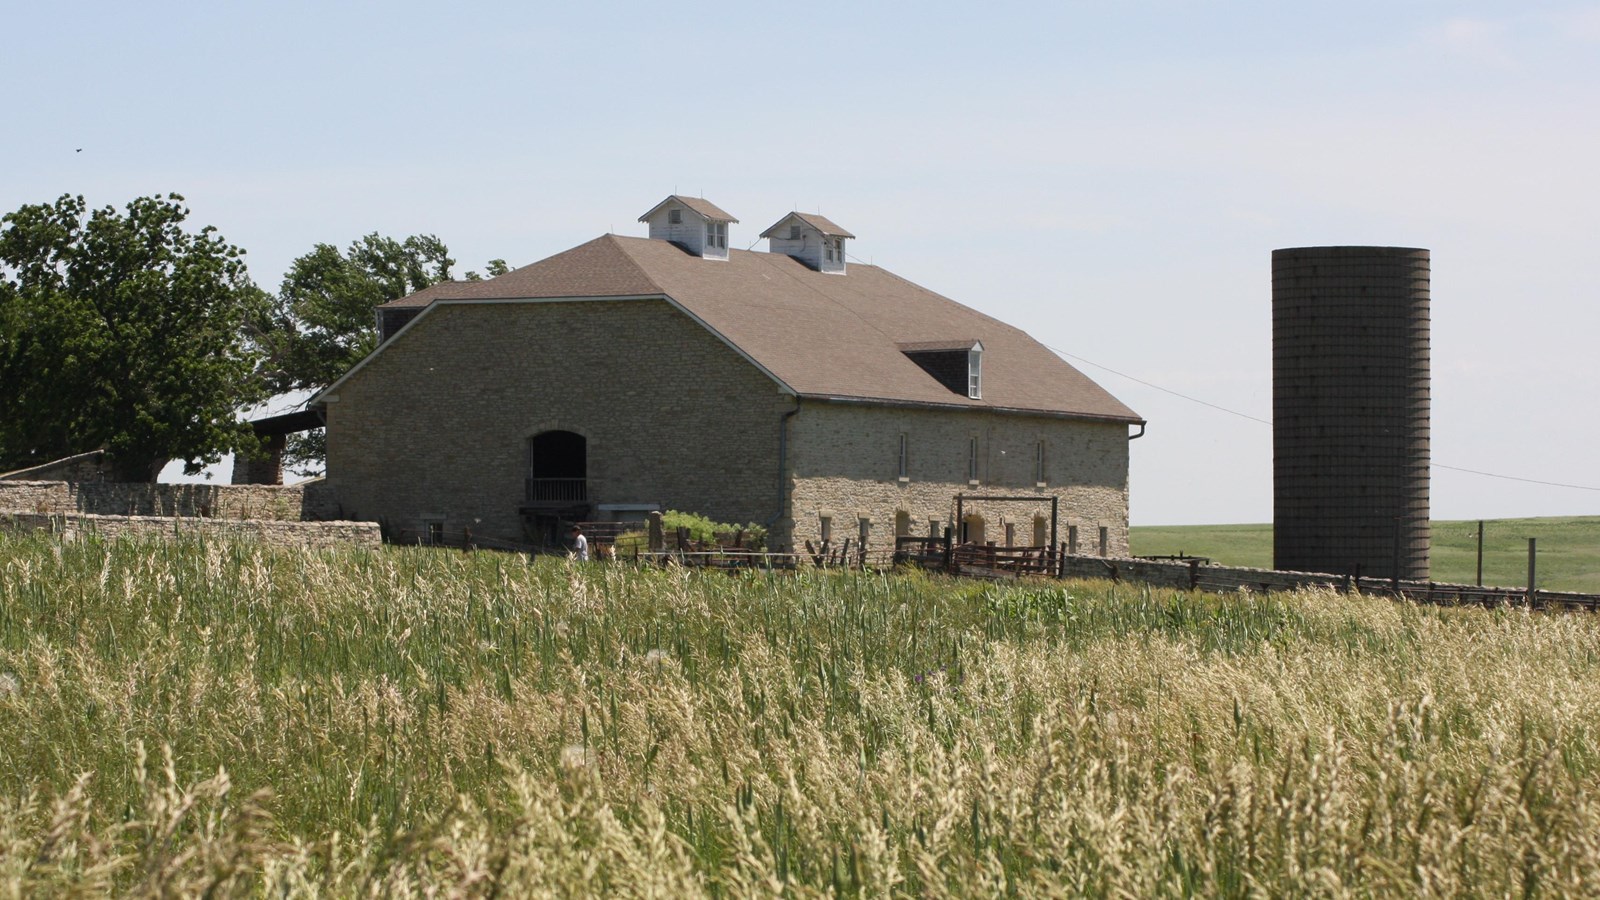 A three story stone barn stands beyond the grass field.